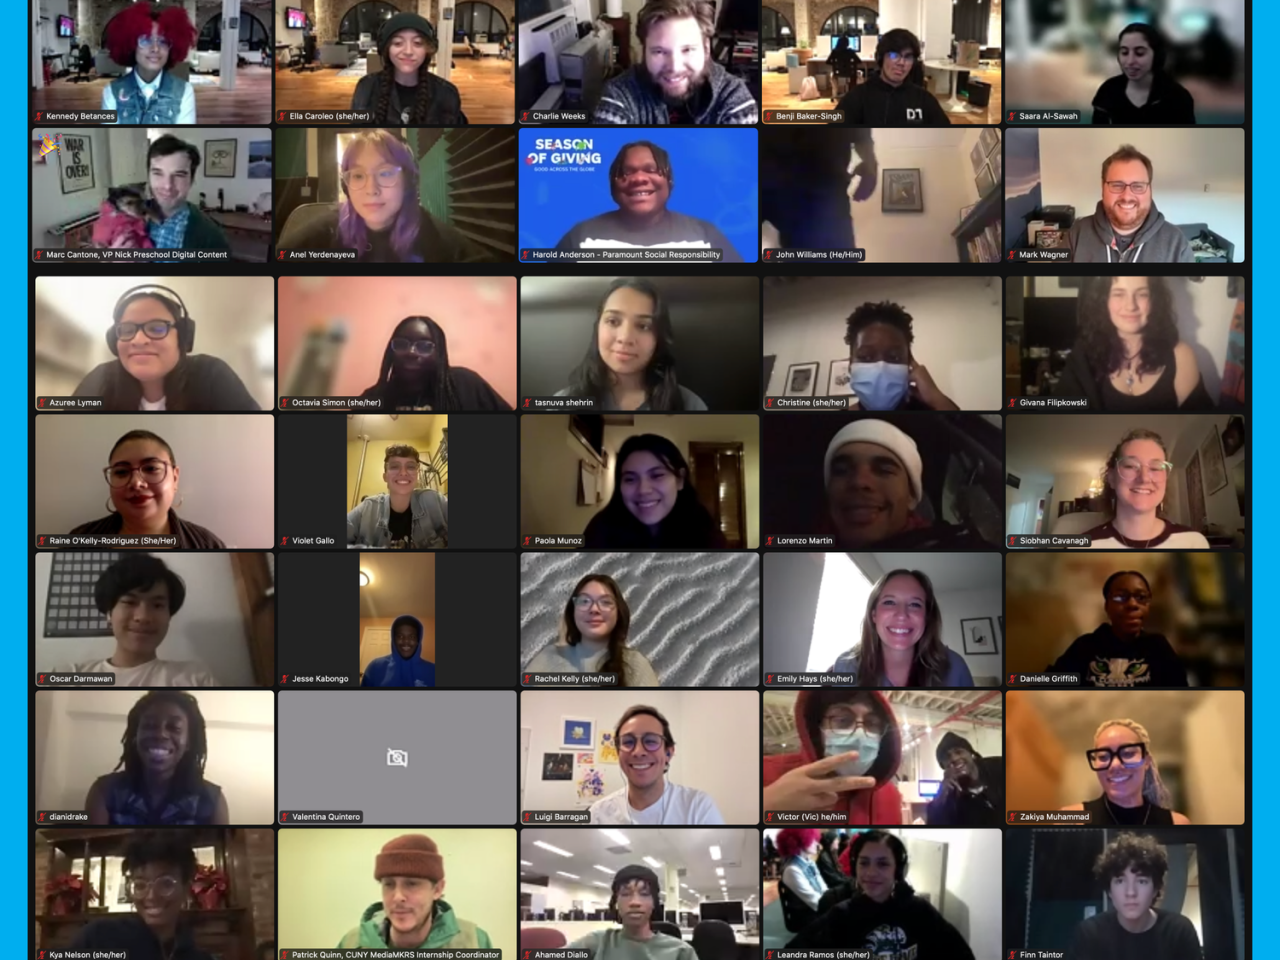 A screenshot of a virtual meeting with 65 attendees.